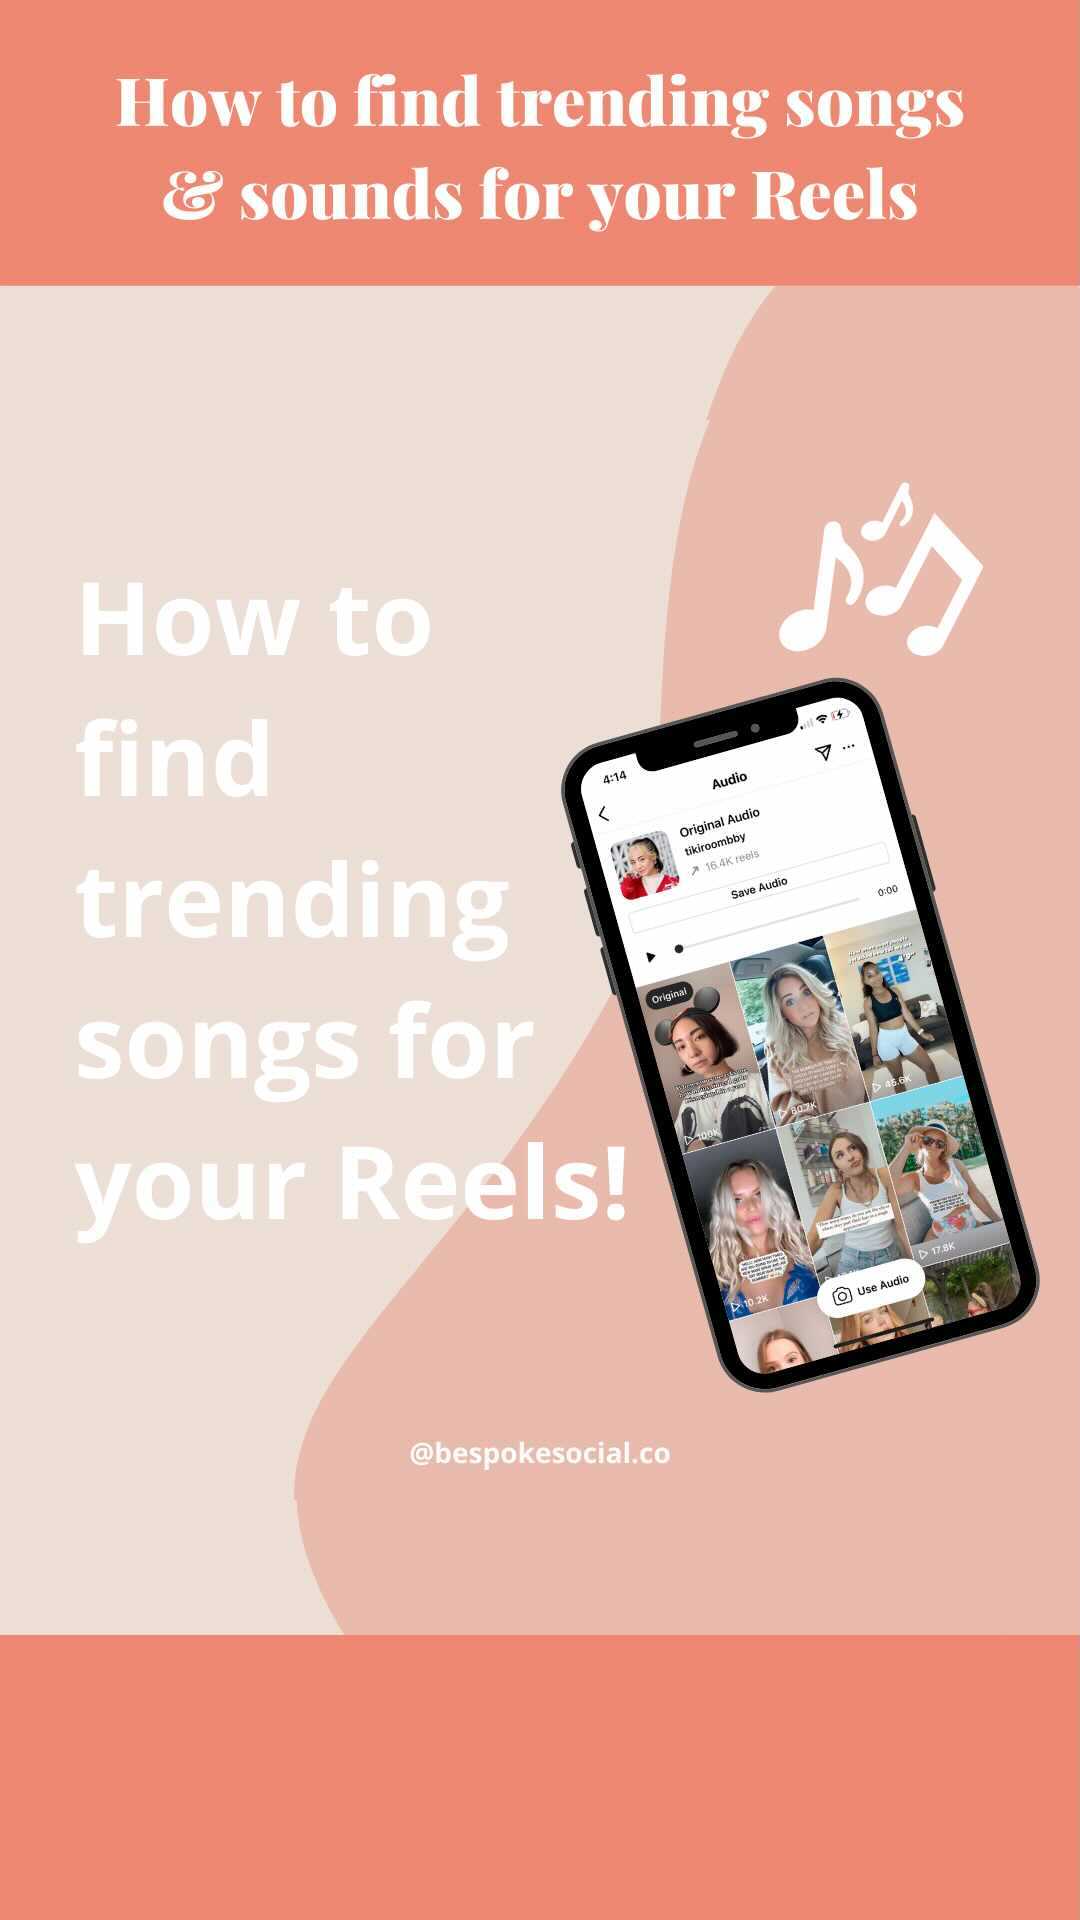 Struggling to find trending songs and sounds for your Reels? This quick tutorial can help!🎶

@trendtok_app is another great (paid) tool you can use as well!💁🏽‍♀️

I’m also super excited to announce that I recently added a “Reels only” package to my services suite!

➤ If you could use some support coming up with ideas for your Reels, creating, and editing them then this new service is for you!

➤ I’ll research what’s working in your niche, find trending songs & sounds, show you exactly what to film, then edit the video for you!

➤ And I’m offering all this at a CRAZY low price of $300! (For a limited time!)

If this sounds like the lifesaver you’ve been waiting for, message me for more details!

Happy creating!✨
.
.
.
.
. 
#socialmediaexpert #socialmediacoach #socialmediatips #contentmarketingtips #instagramgrowthhacks #instagramgrowth #instagramcoach #socialmediastrategist #socialmediastrategy #contentmarketingtips #igtip #instagramguru #marketingtips #contentcreator #contentmarketingtips #womeninbusiness #femalebizowner #reelstrending  #reelstips #reelstutorial #instagramtipsandtricks #digitalnomadgirls #digitalnomads #digitalnomadlifestyle #growyourbusinessonline #growyourbiz #growyourbrand